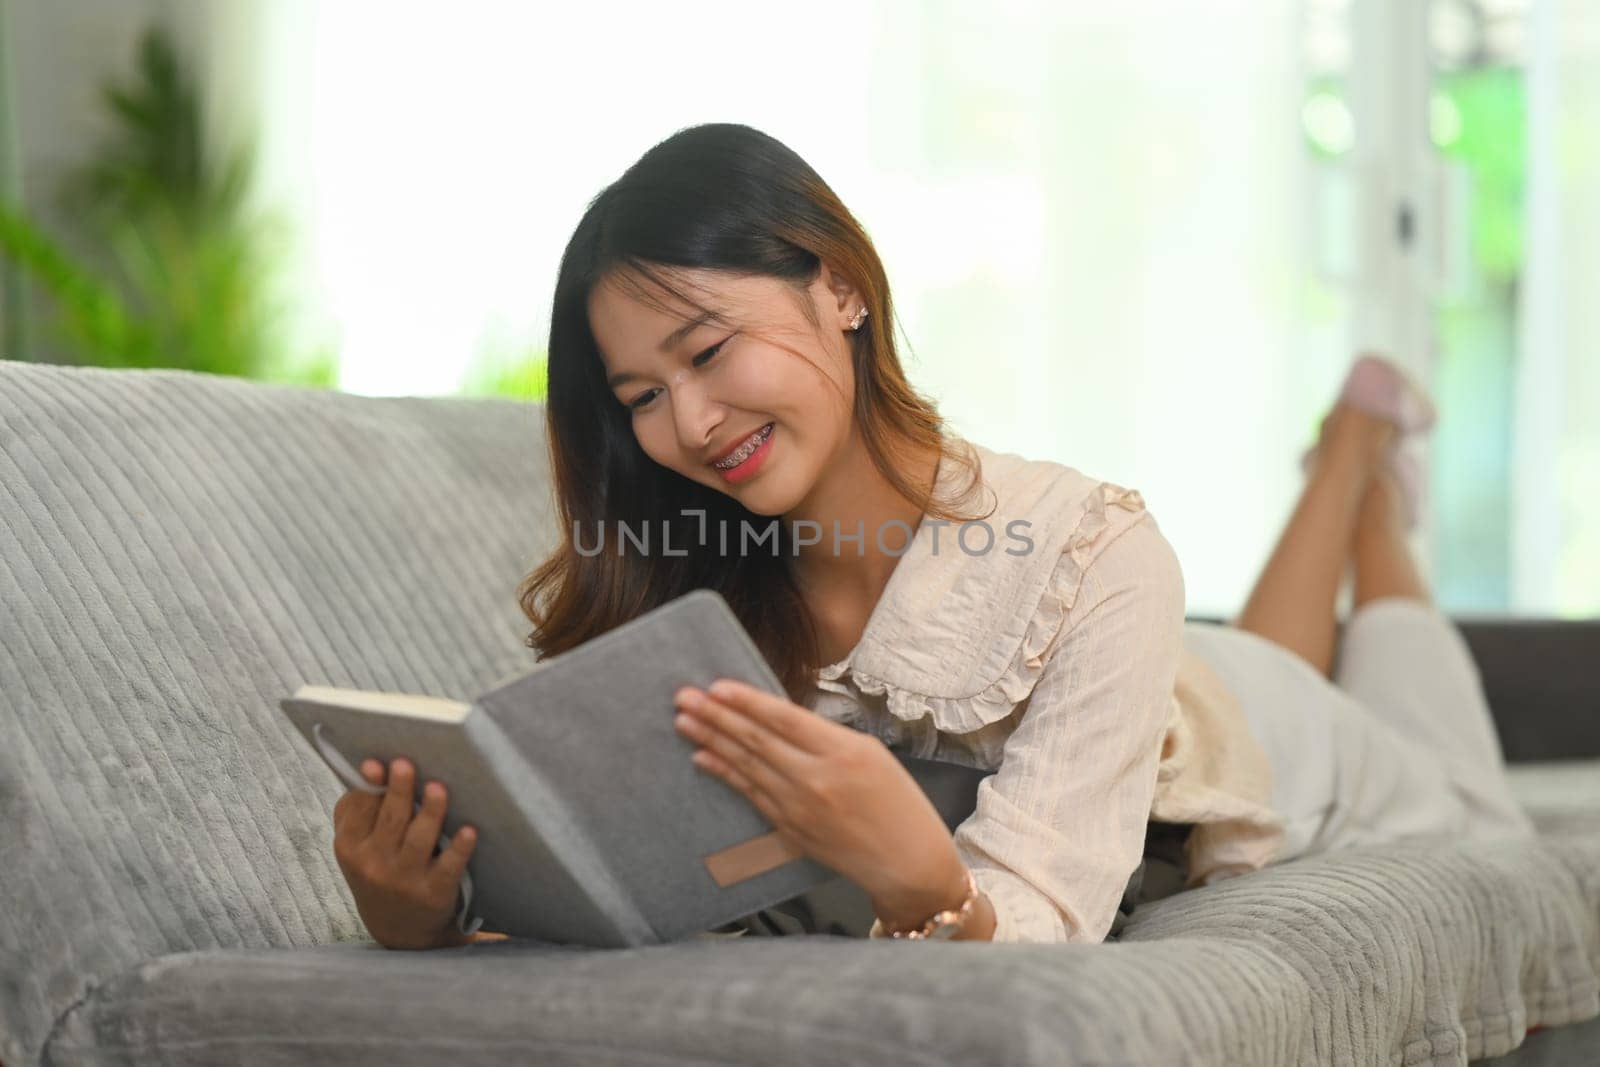 Happy young woman lying on cozy sofa and reading book. People, leisure and lifestyle concept.